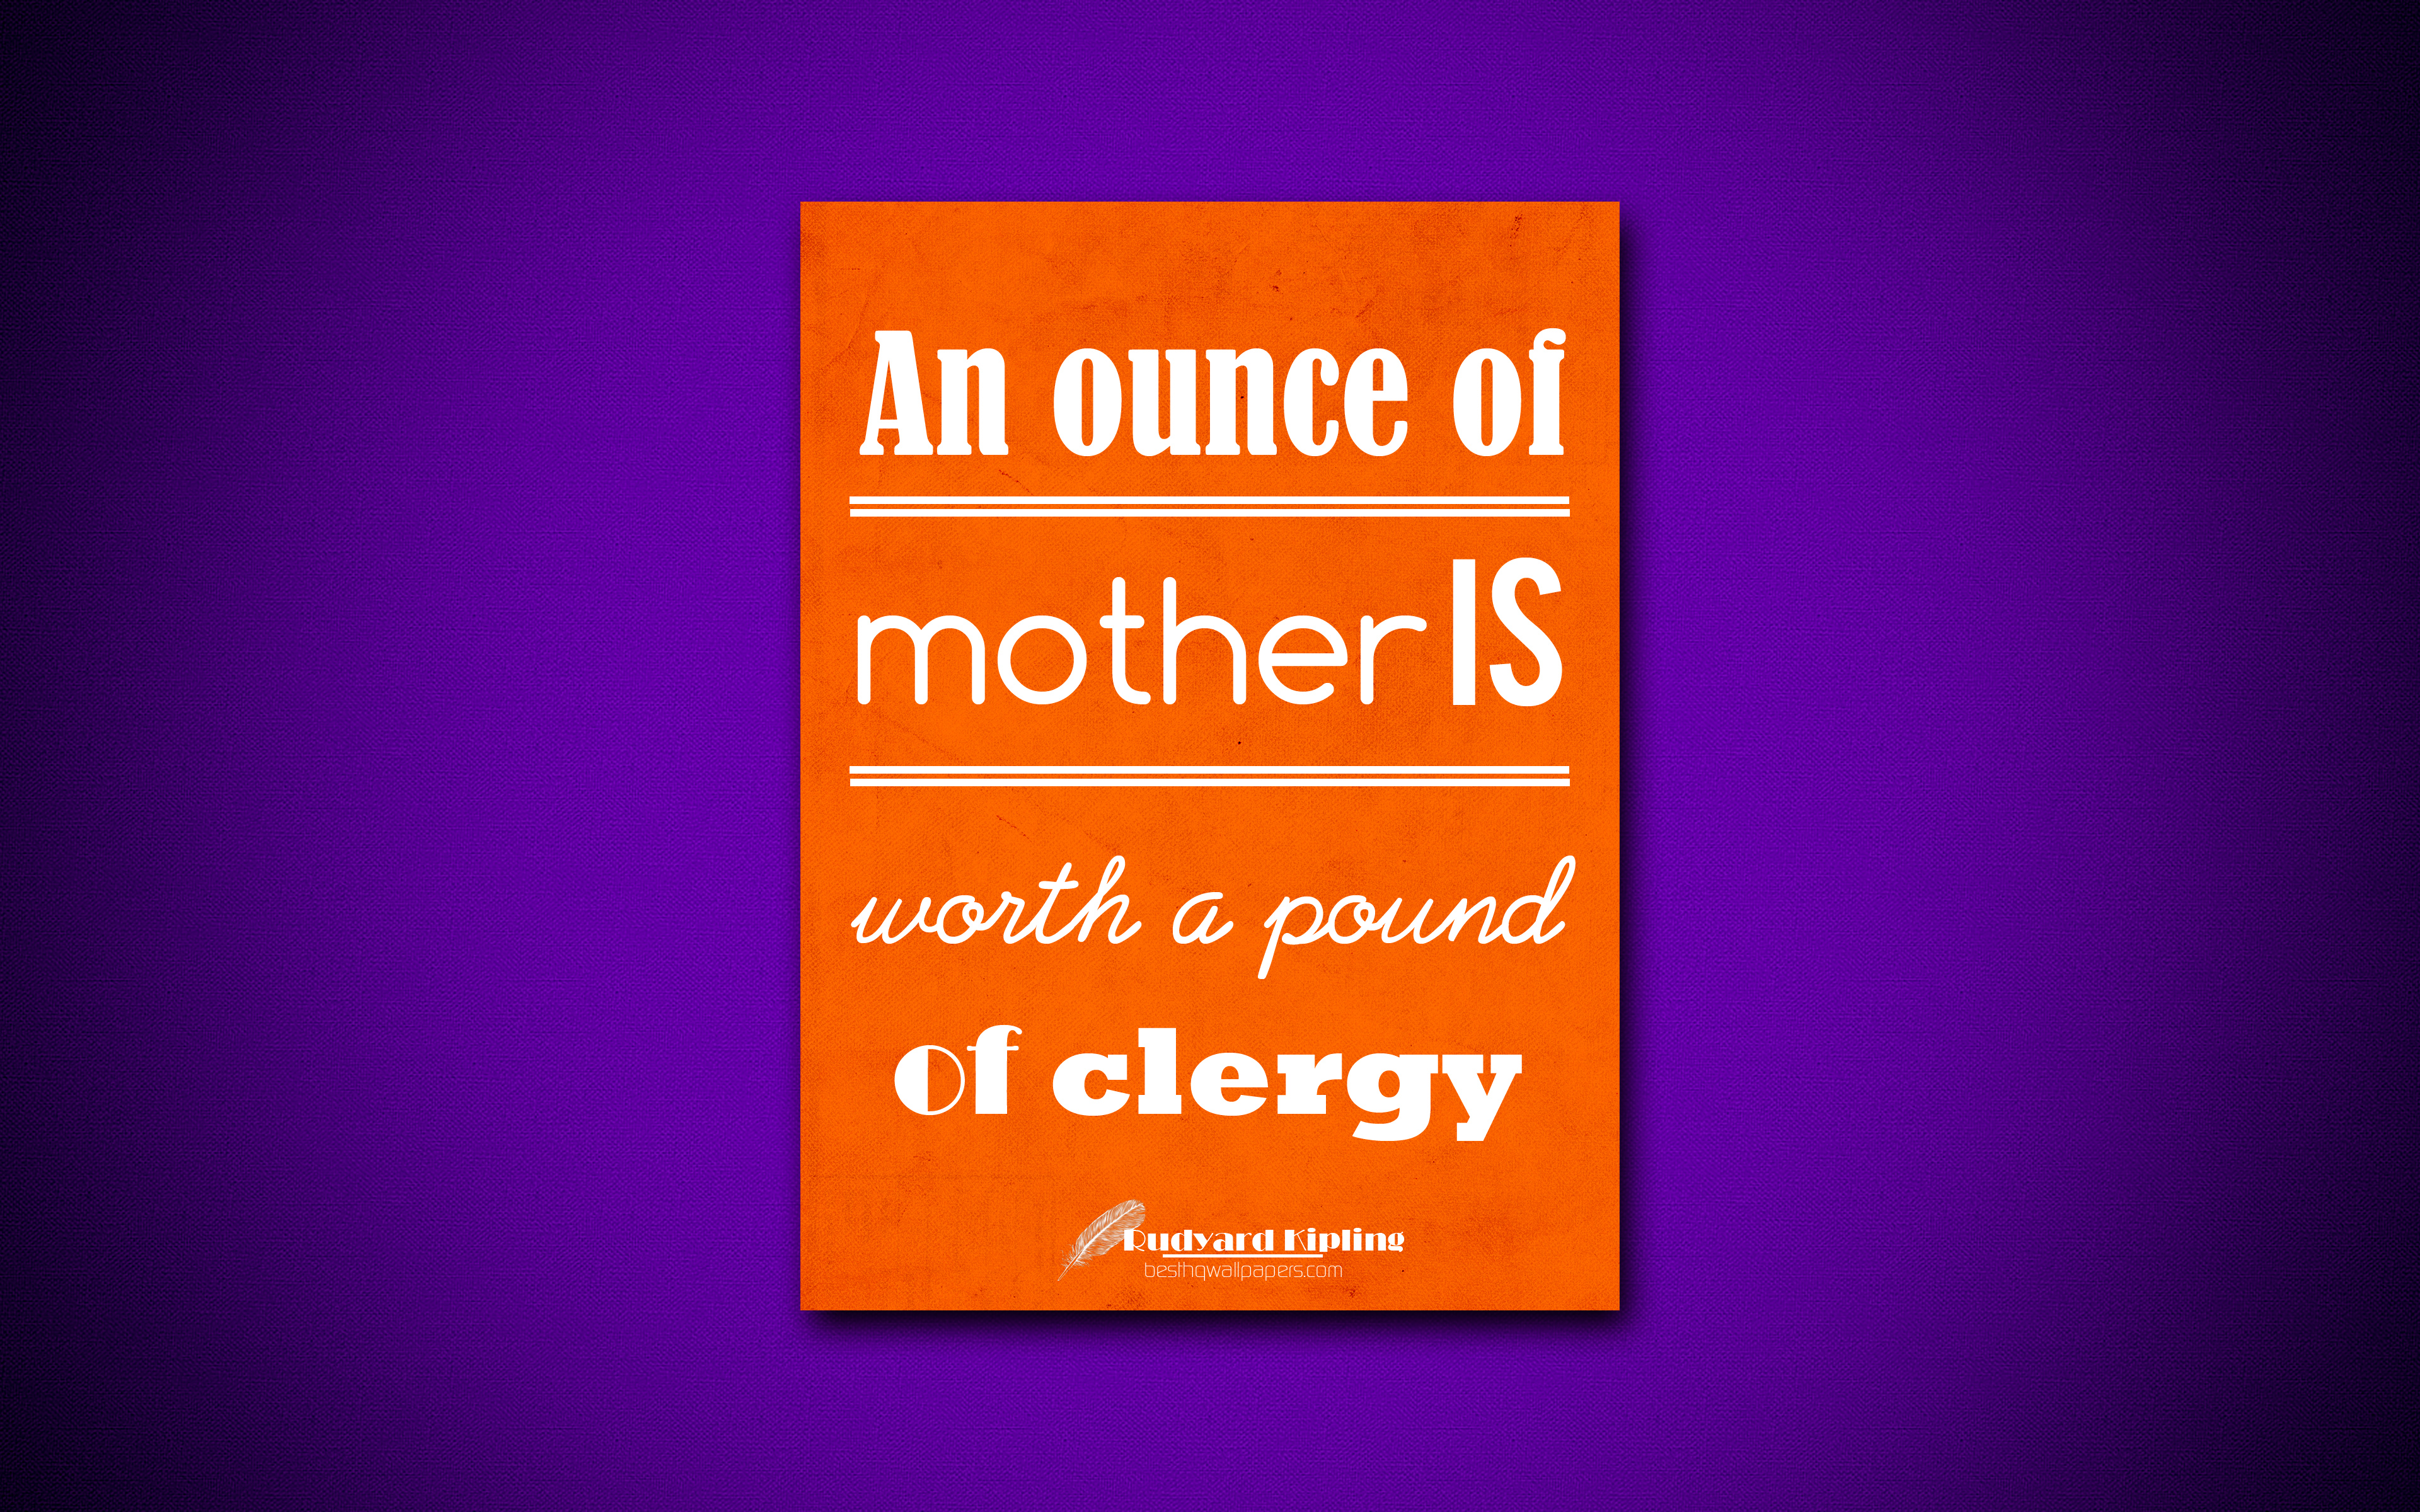 Download Wallpapers An Ounce Of Mother Is Worth A Pound Of Clergy Images, Photos, Reviews